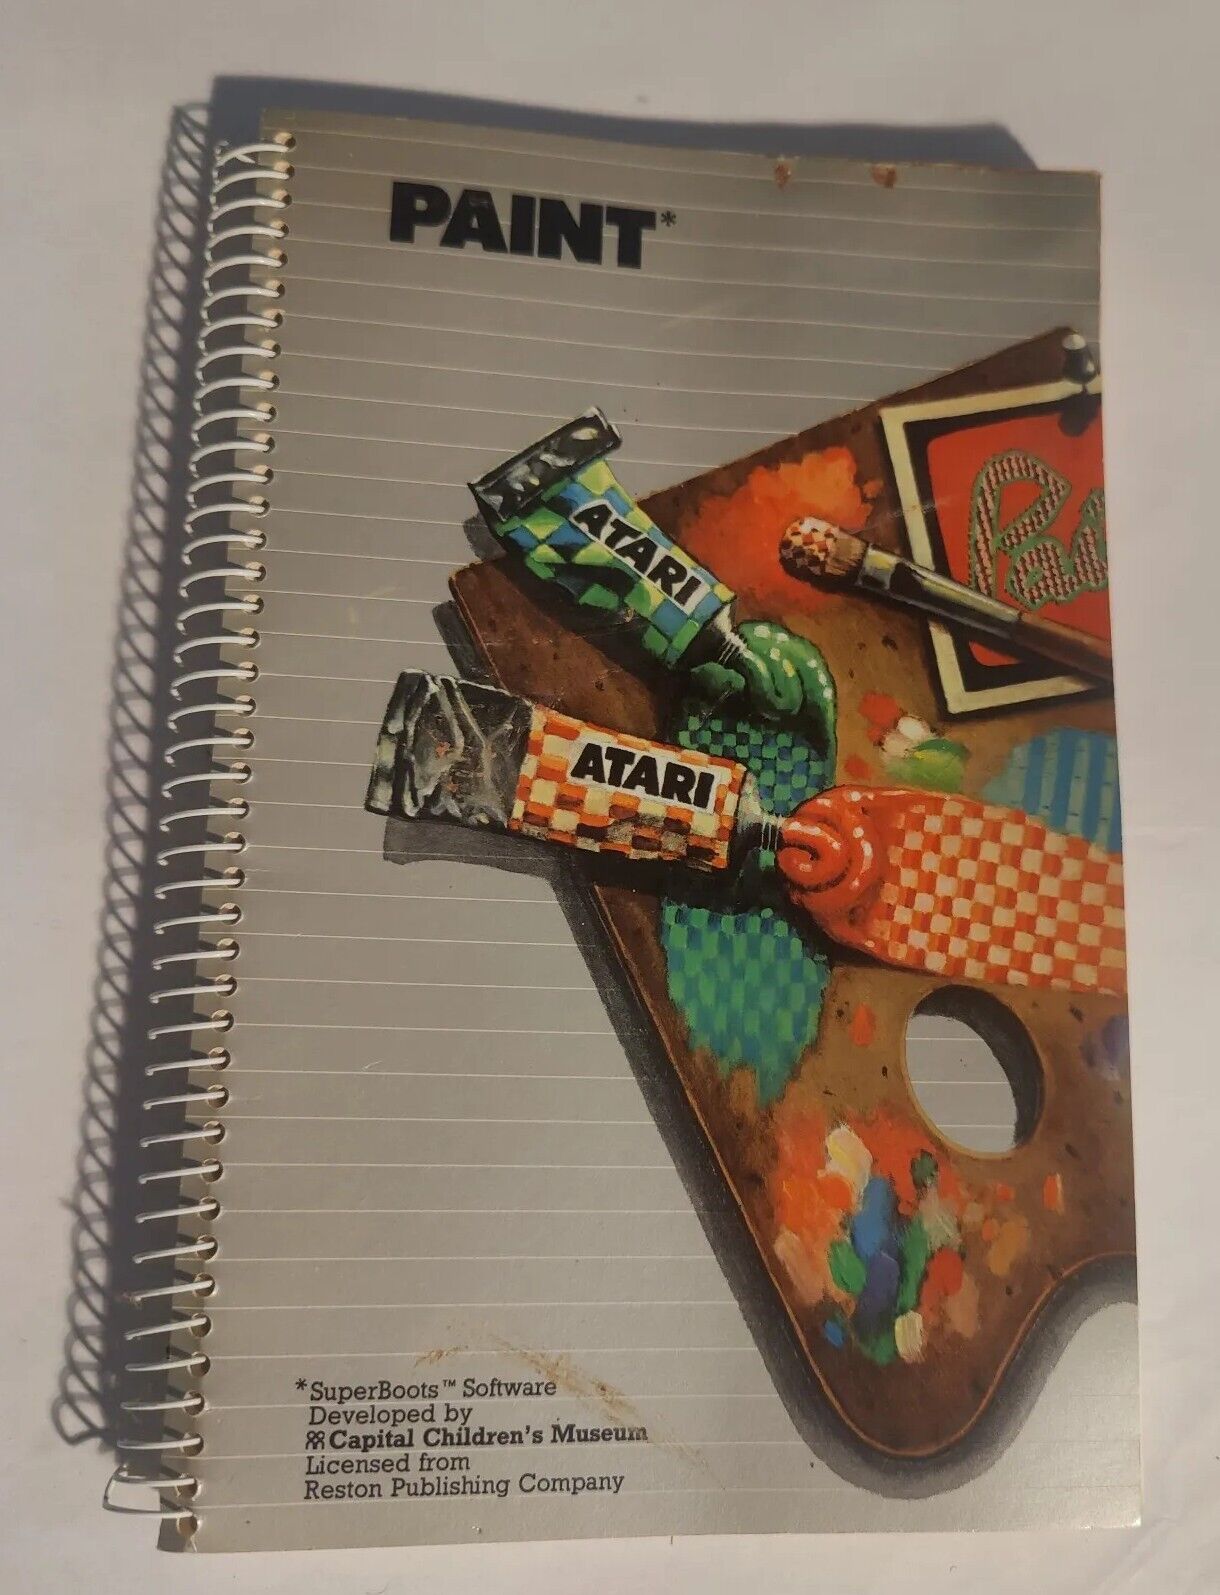 Atari Paint Manual 1983 SuperBoots Software How To Manual For Home Computer